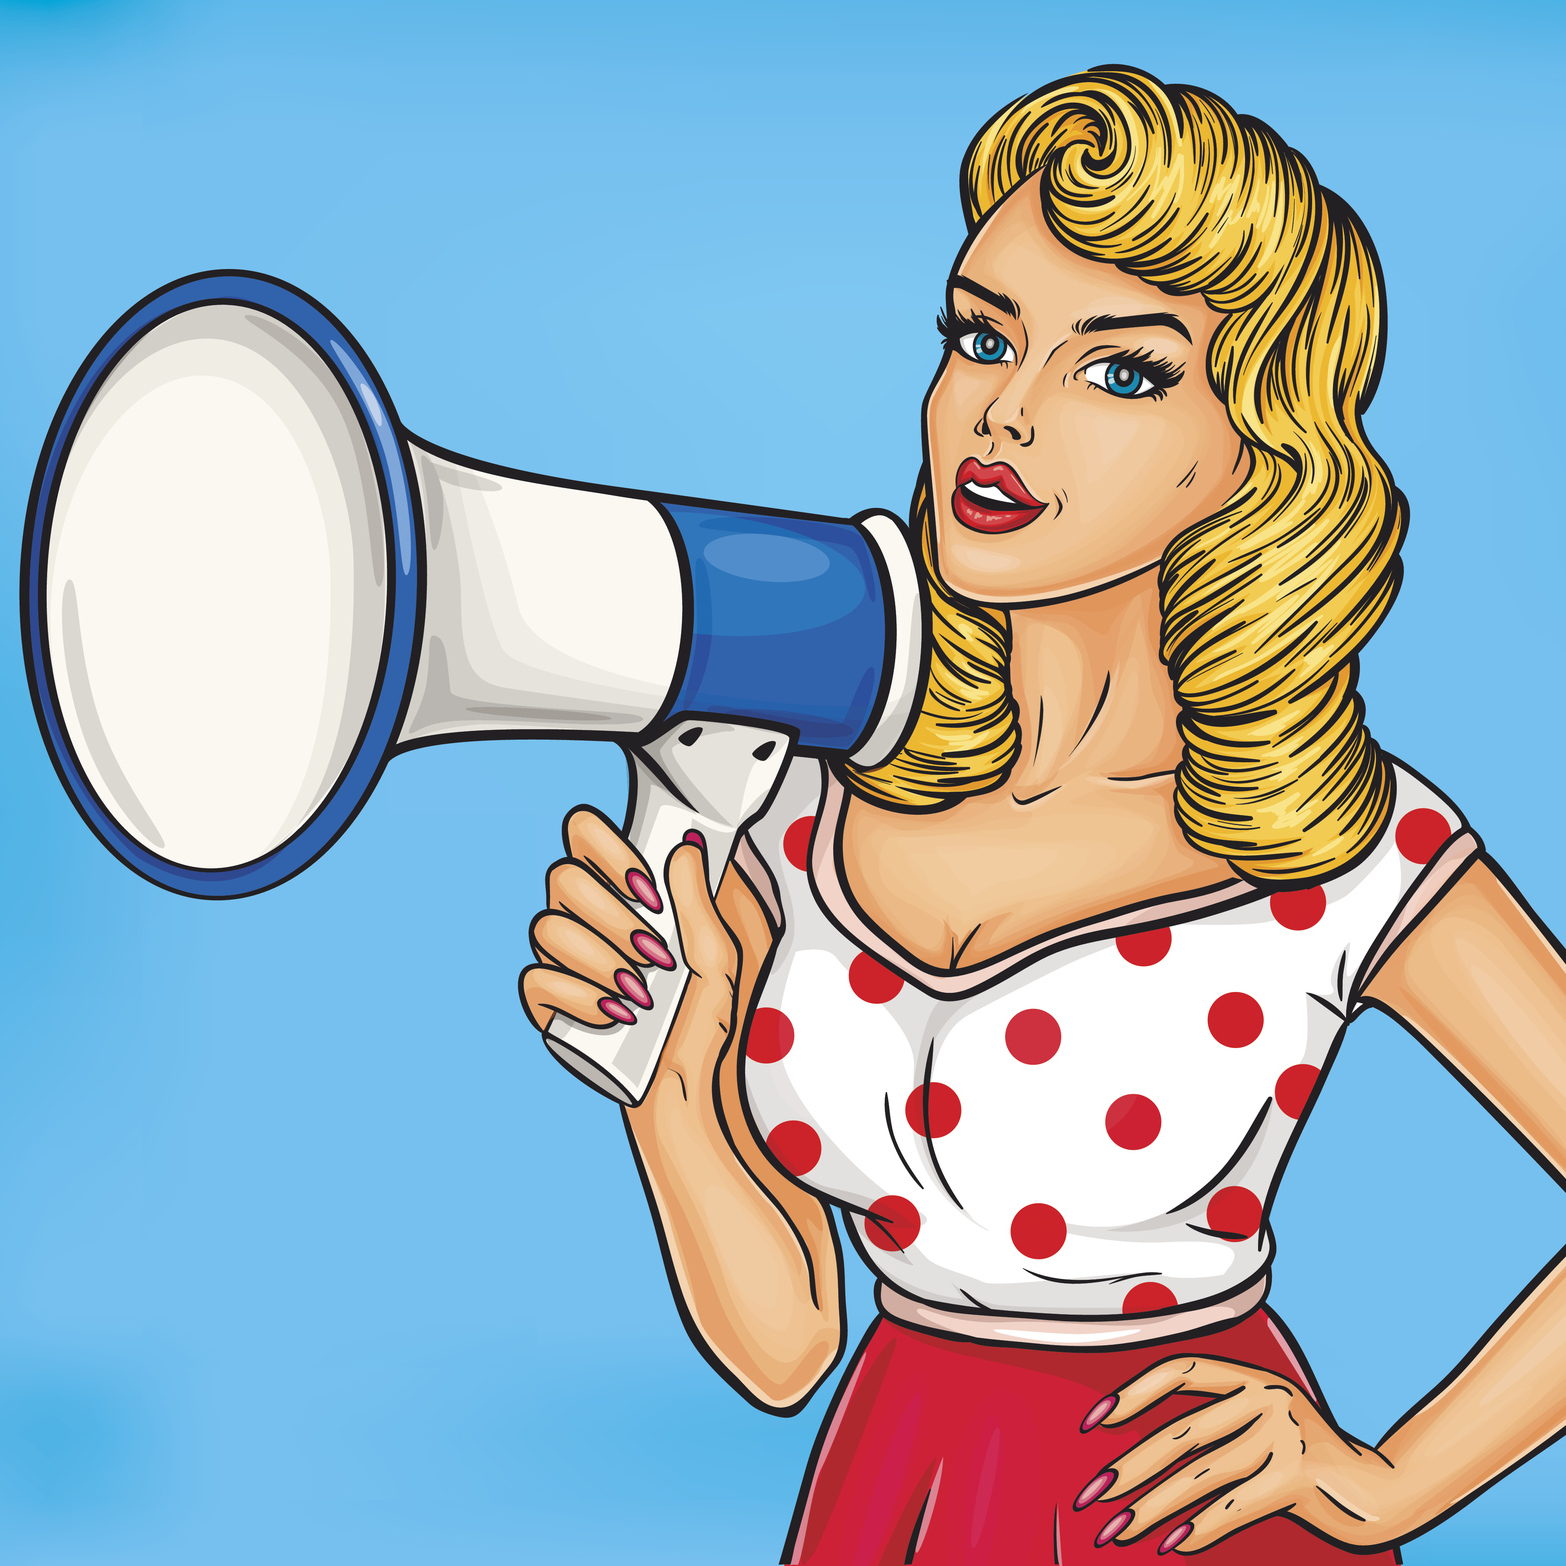 Pop art illustration of a woman with a megaphone, ready to speak out.